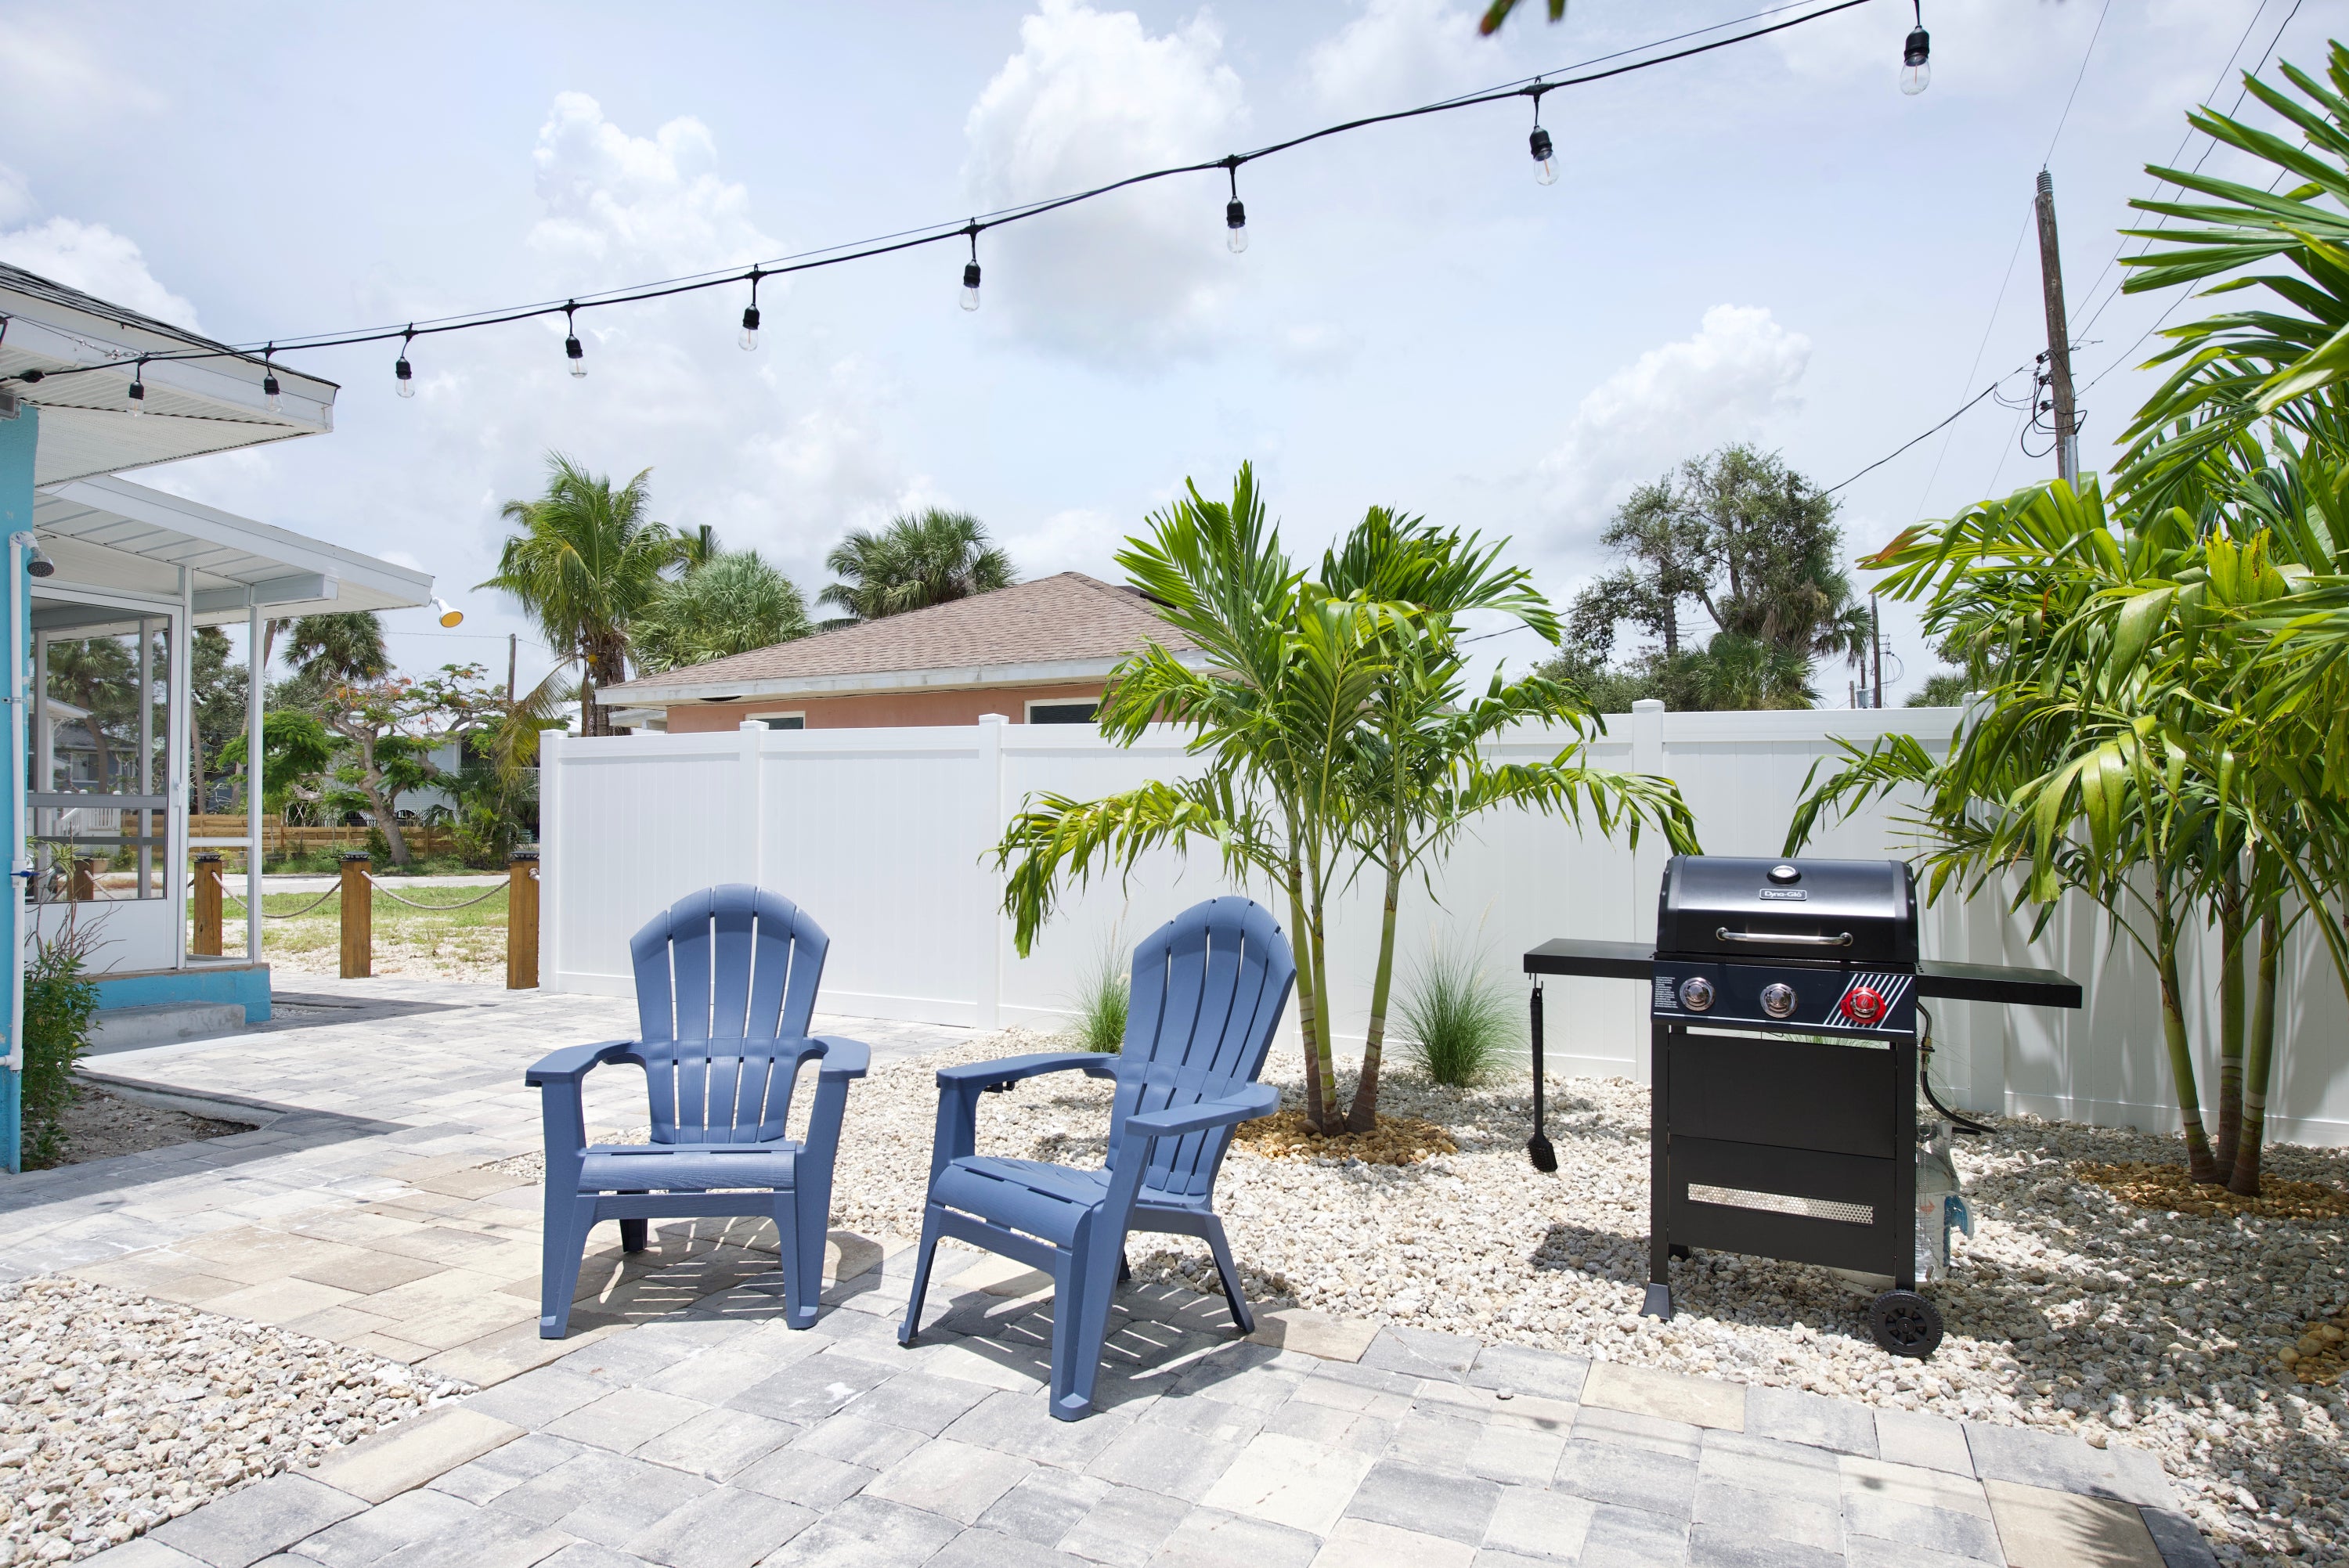 Backyard with grill